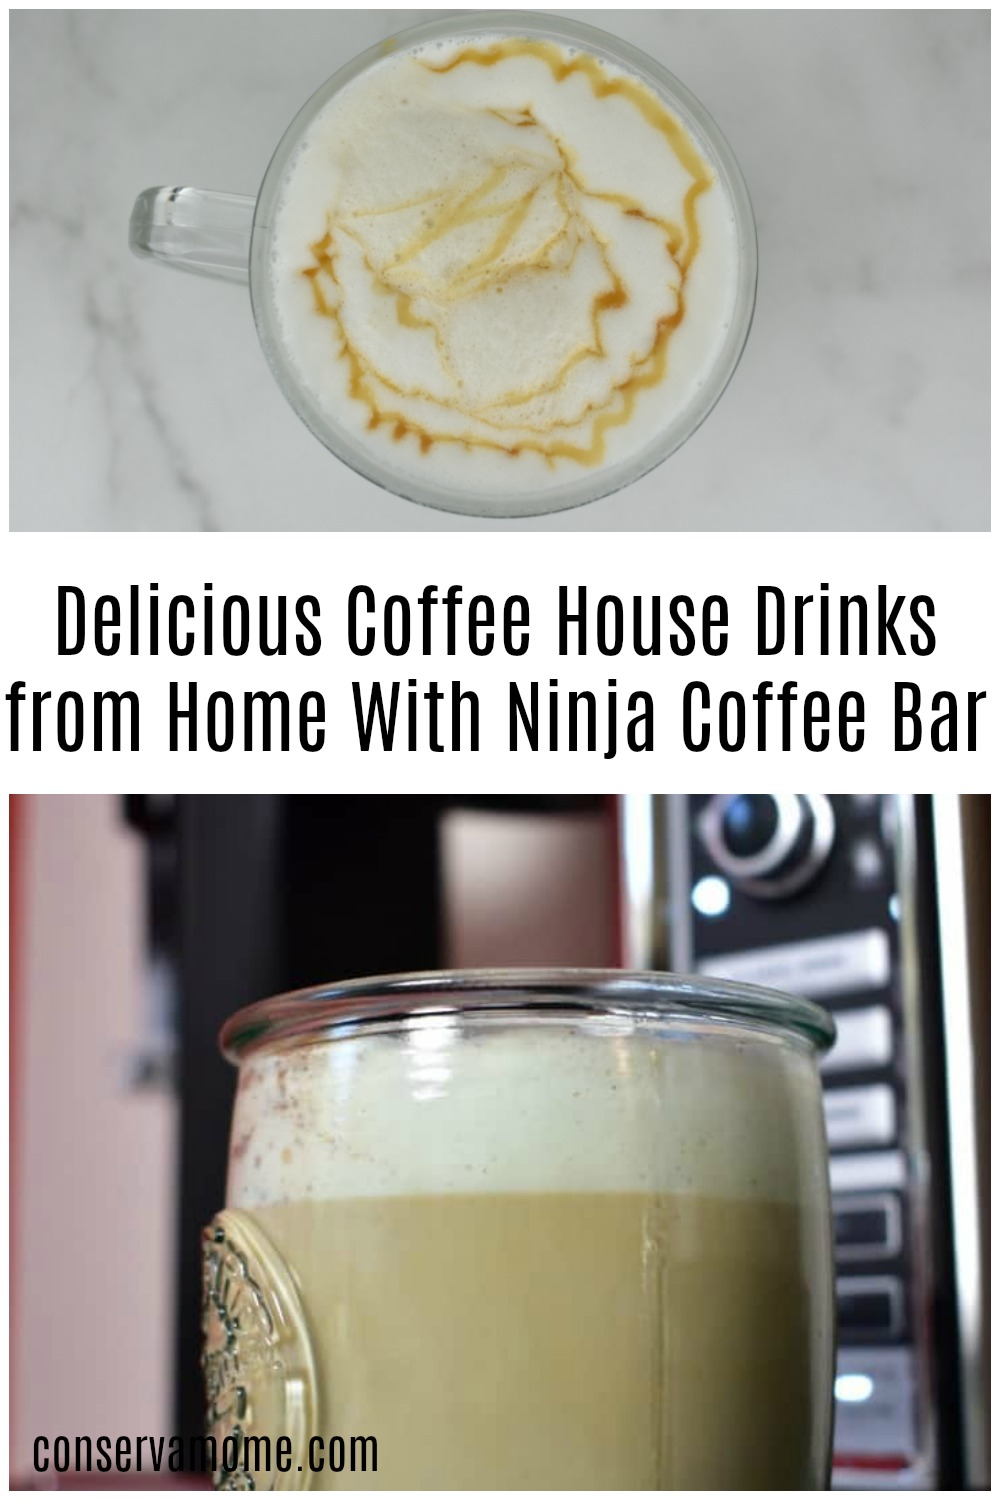 Delicious Coffee House Drinks from Home With Ninja Coffee Bar